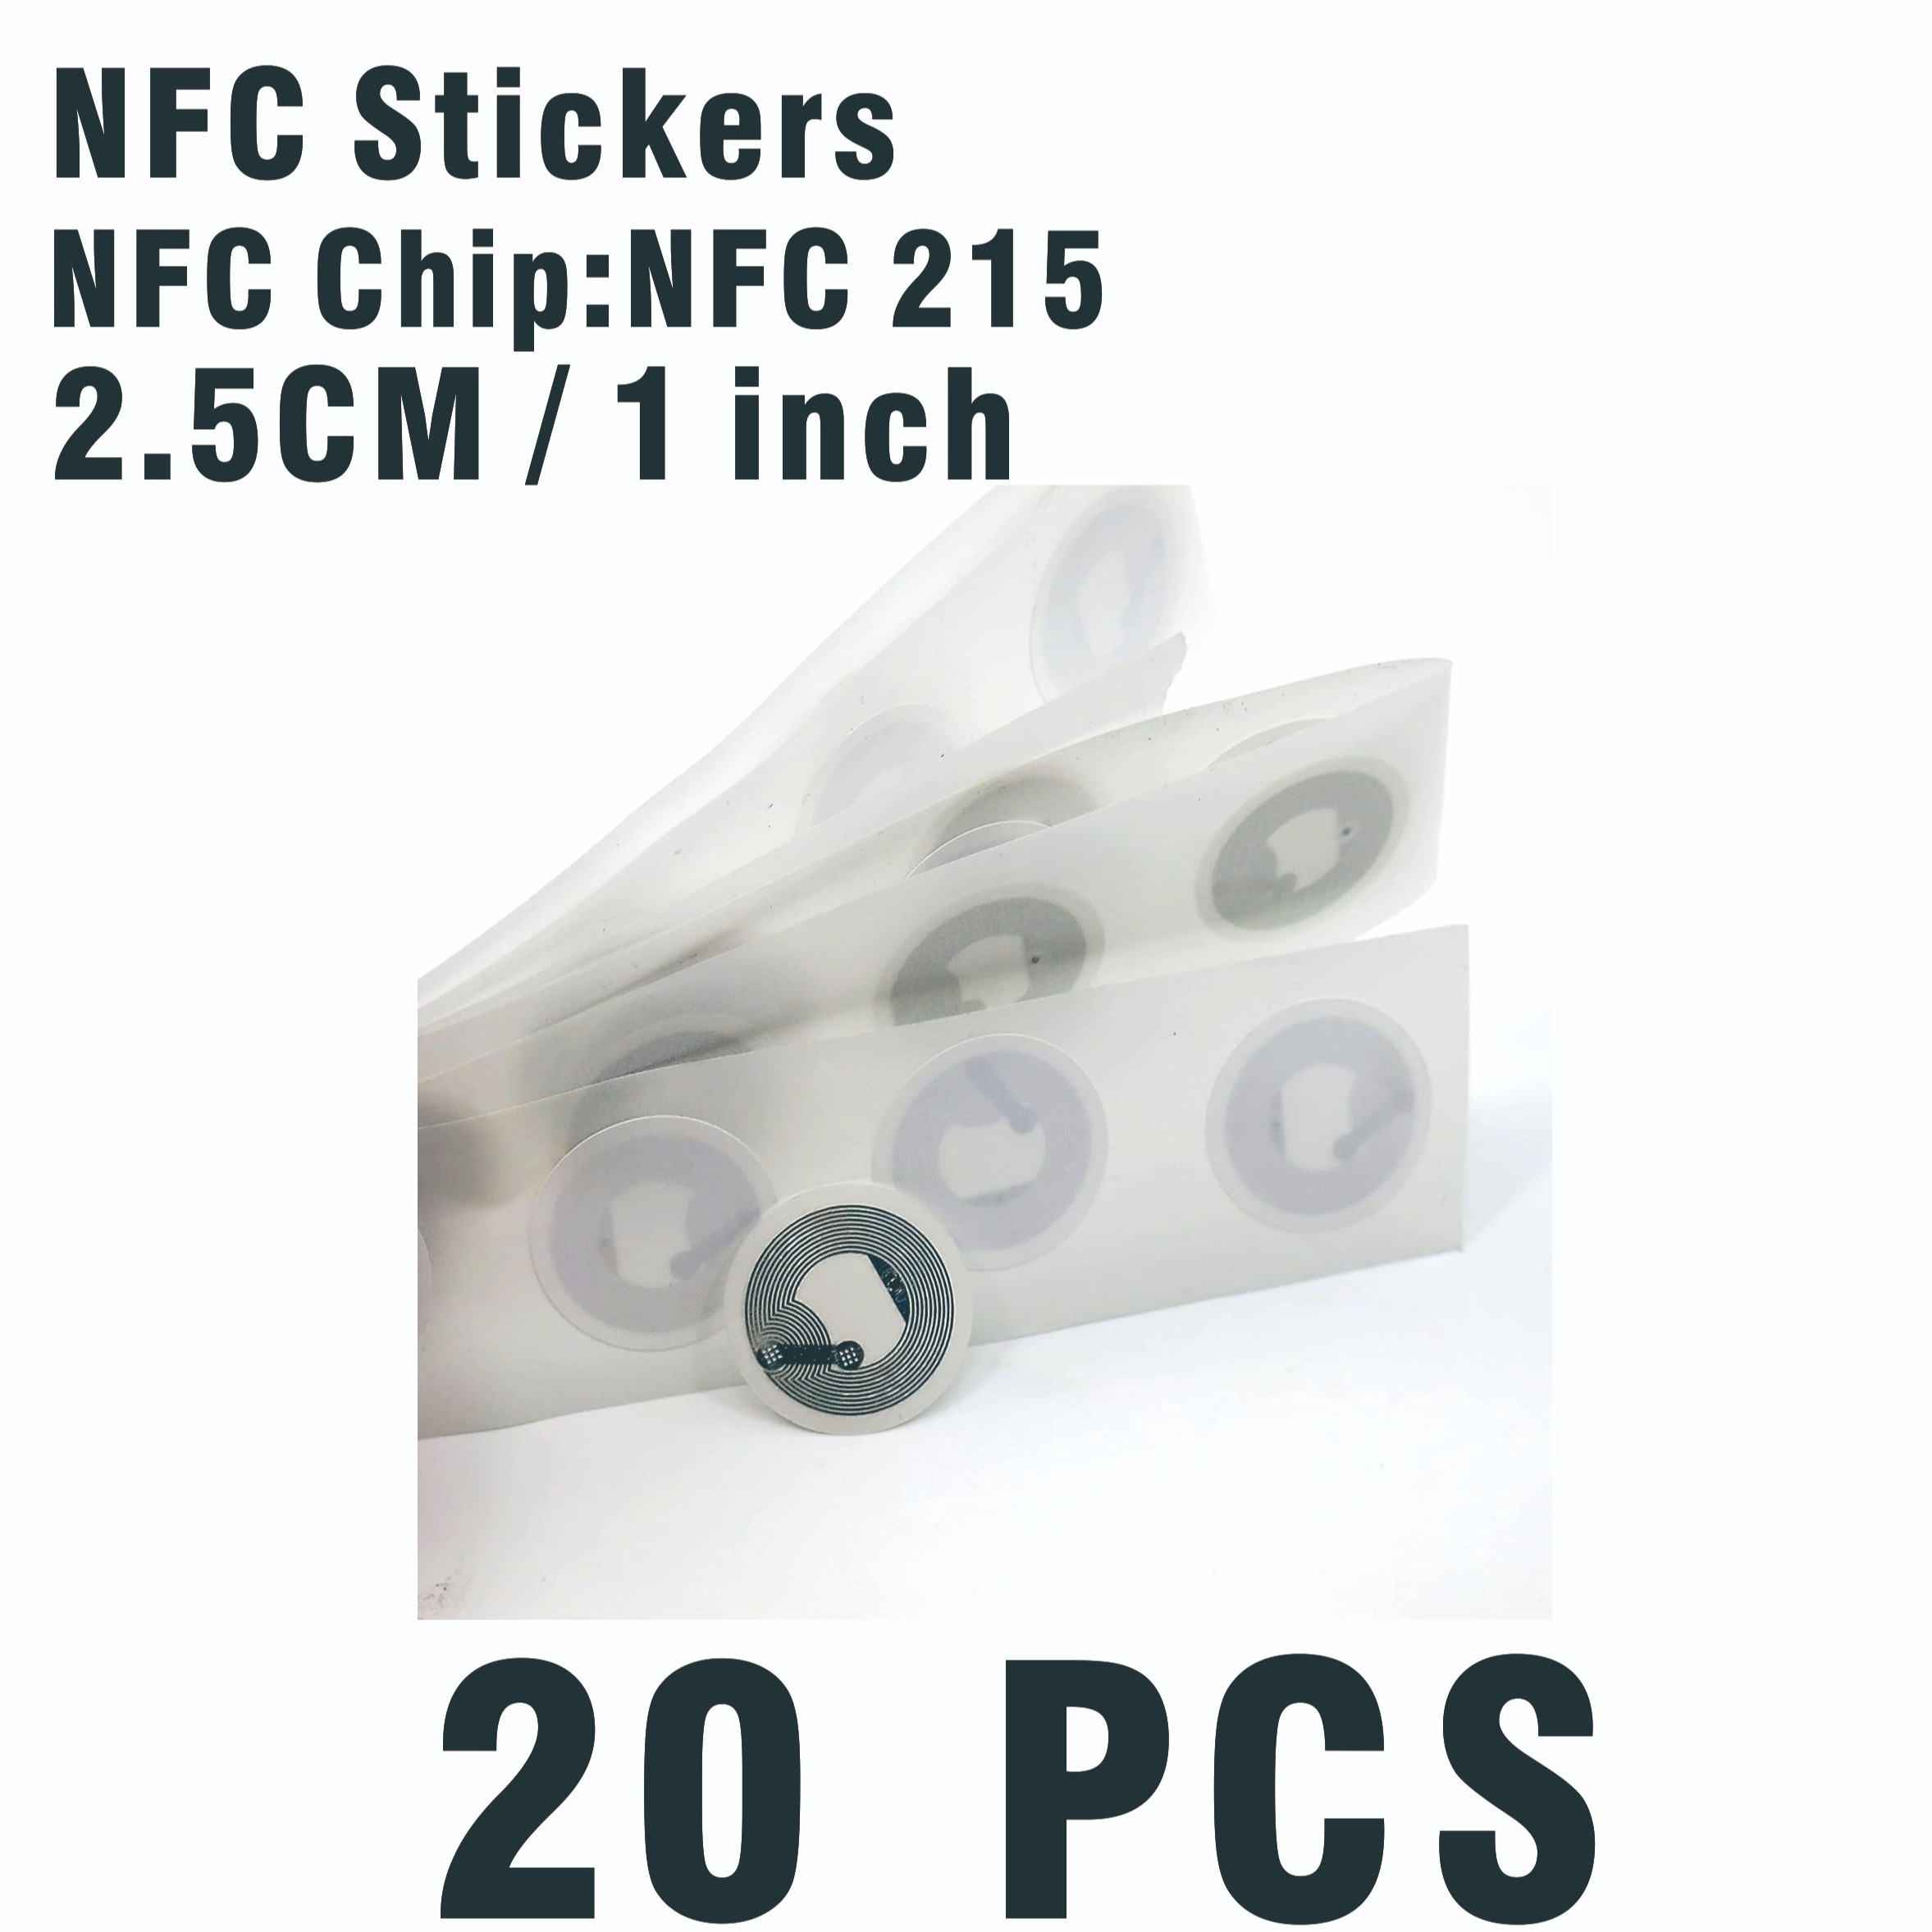 30 pcs NFC Tags NTAG215 NFC Stickers White, Blank Rewritable NFC 215 Tag  NFC Chip Round 25mm, Compatible with TagMo iPhone and All NFC Enabled Device